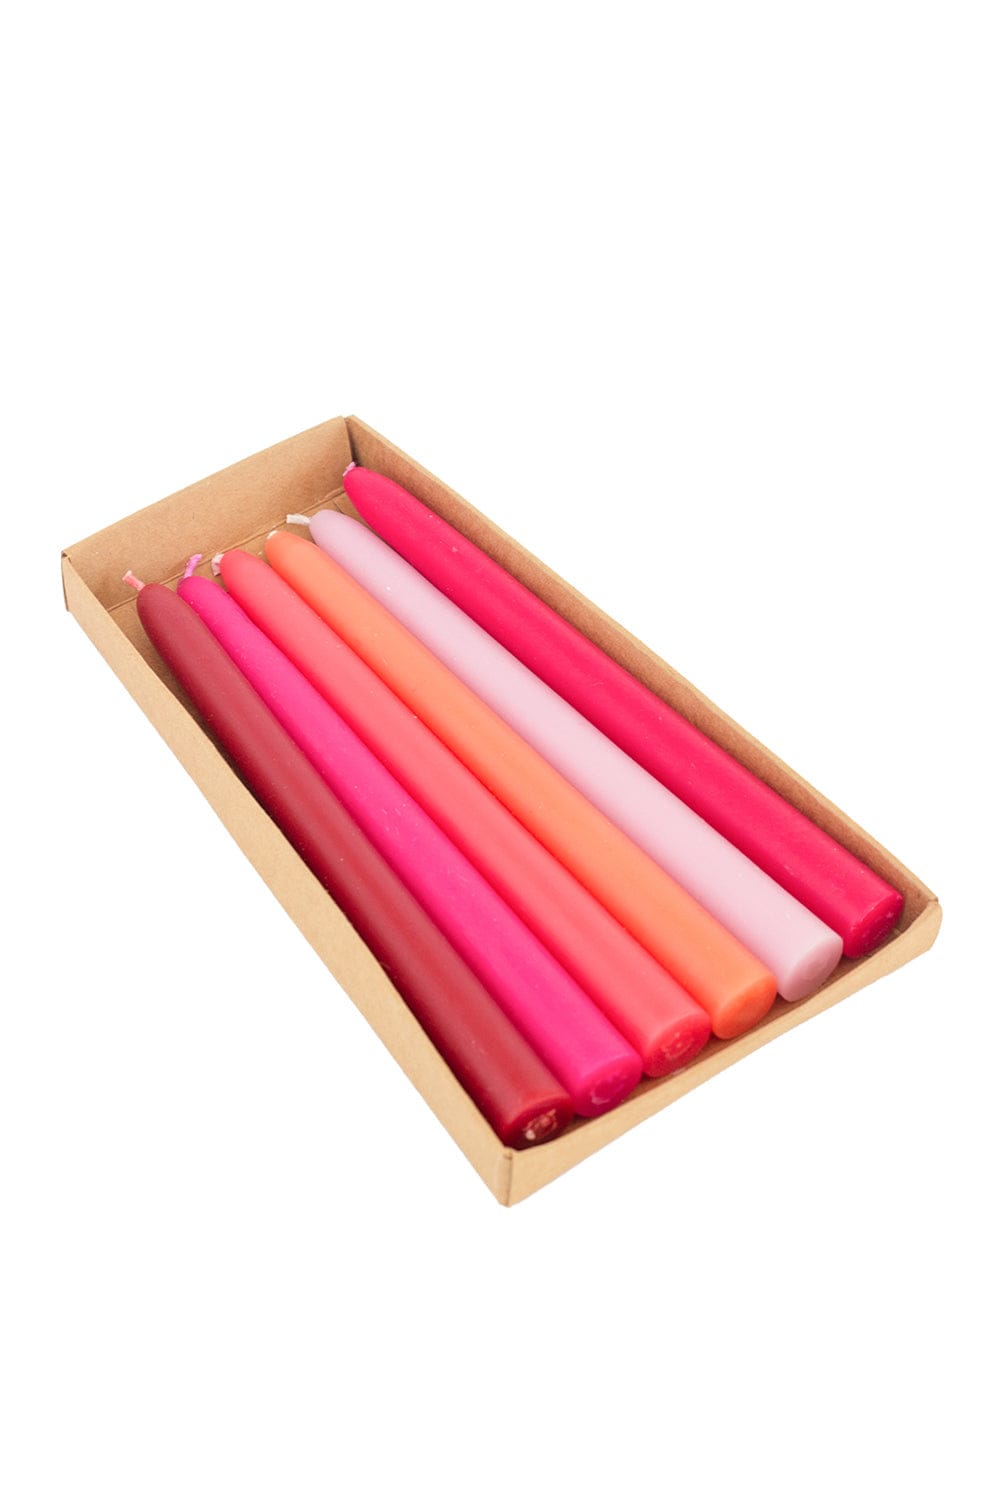 Persimmon Ombre Tapered Candles - set of 6